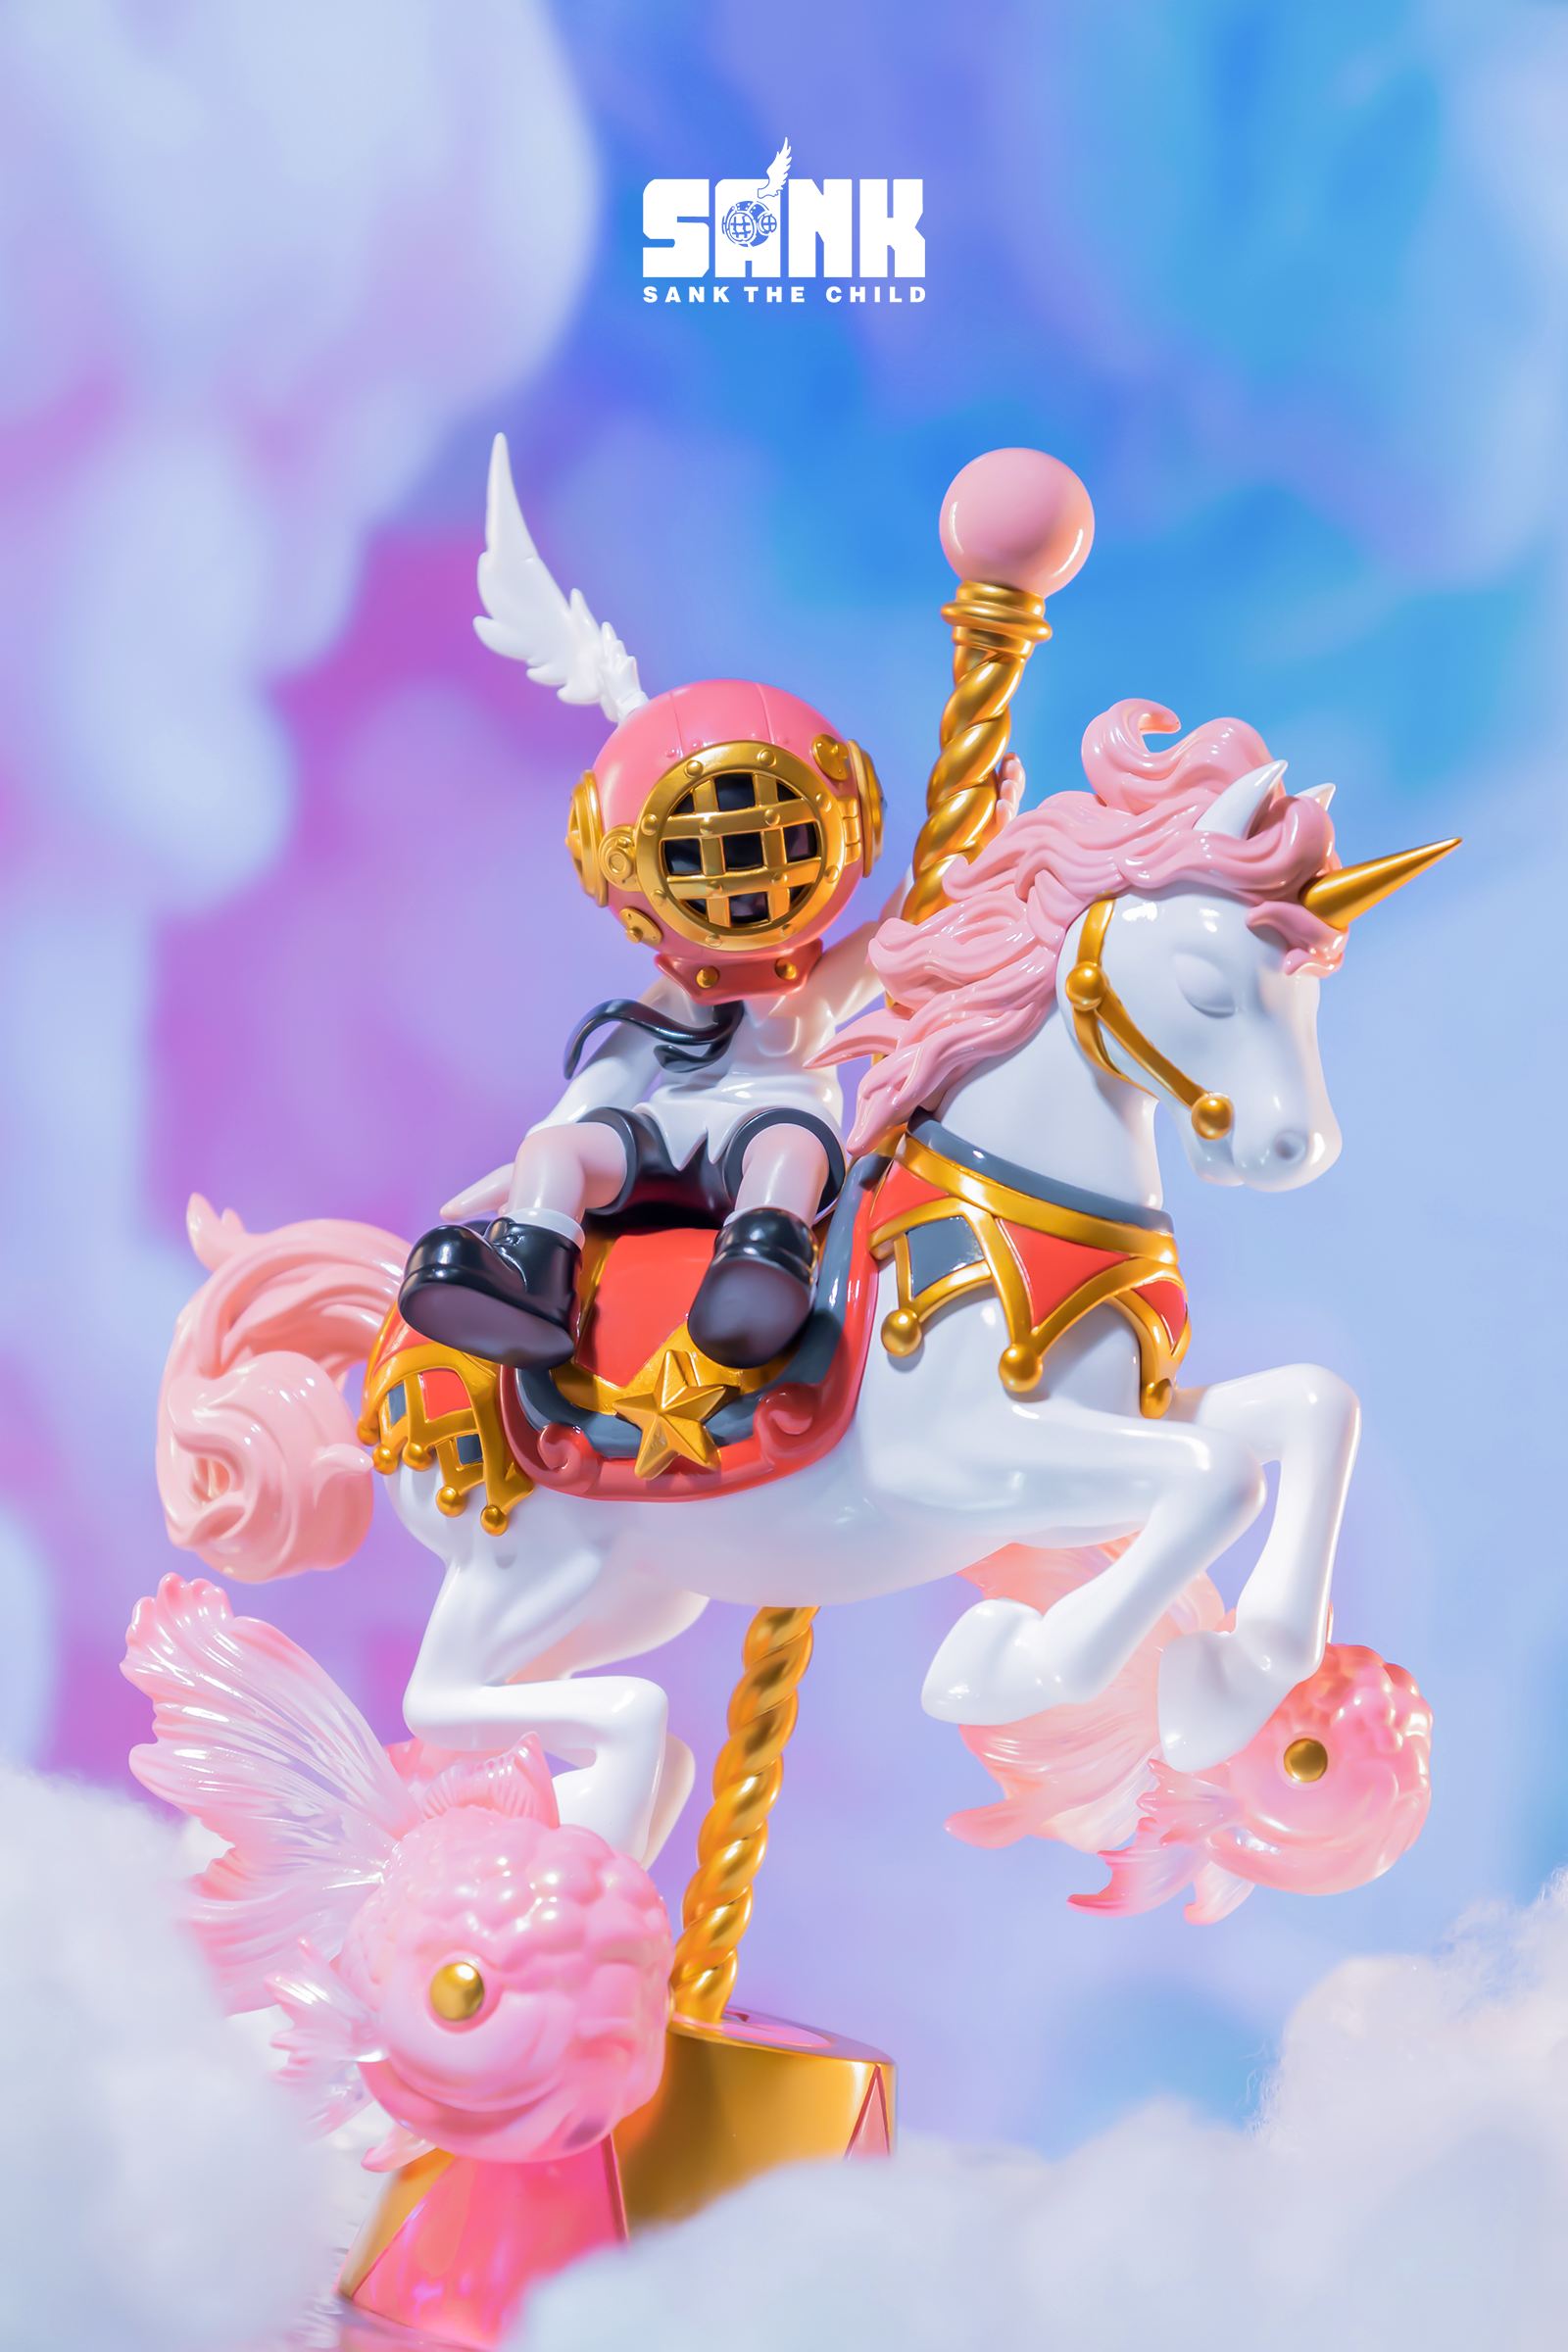 Sank Park-Merry-Go-Round-Pink: Toy horse with rider, angel wings, swirl, and more.